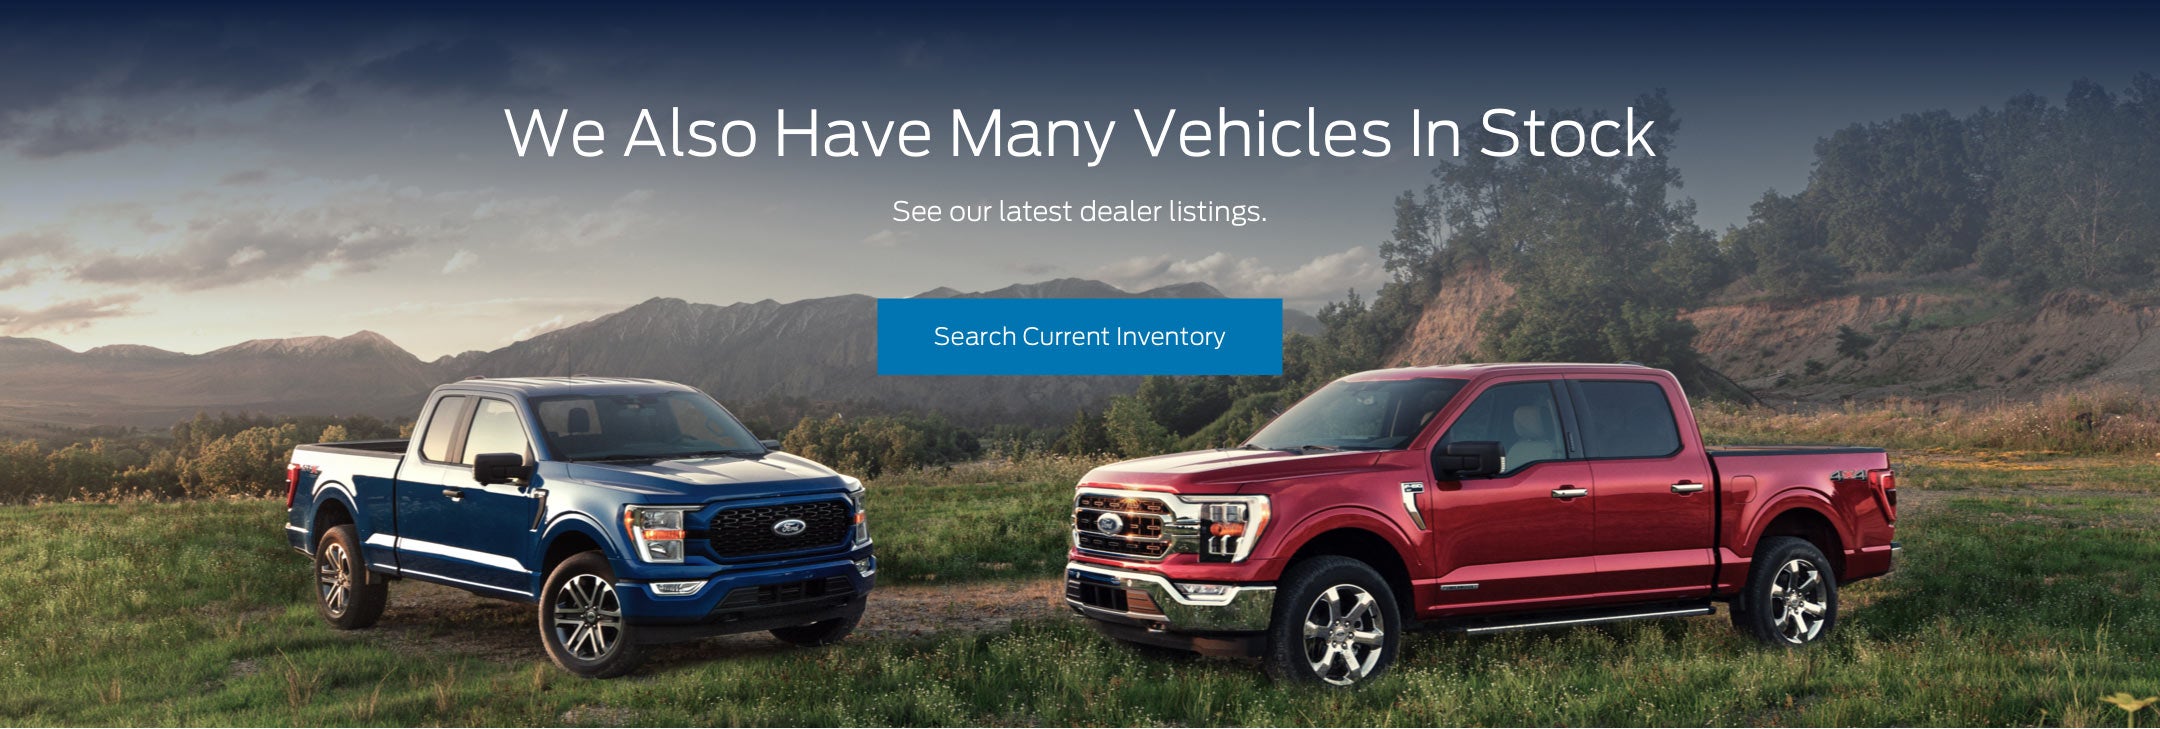 Ford vehicles in stock | Valu Ford in Morris MN